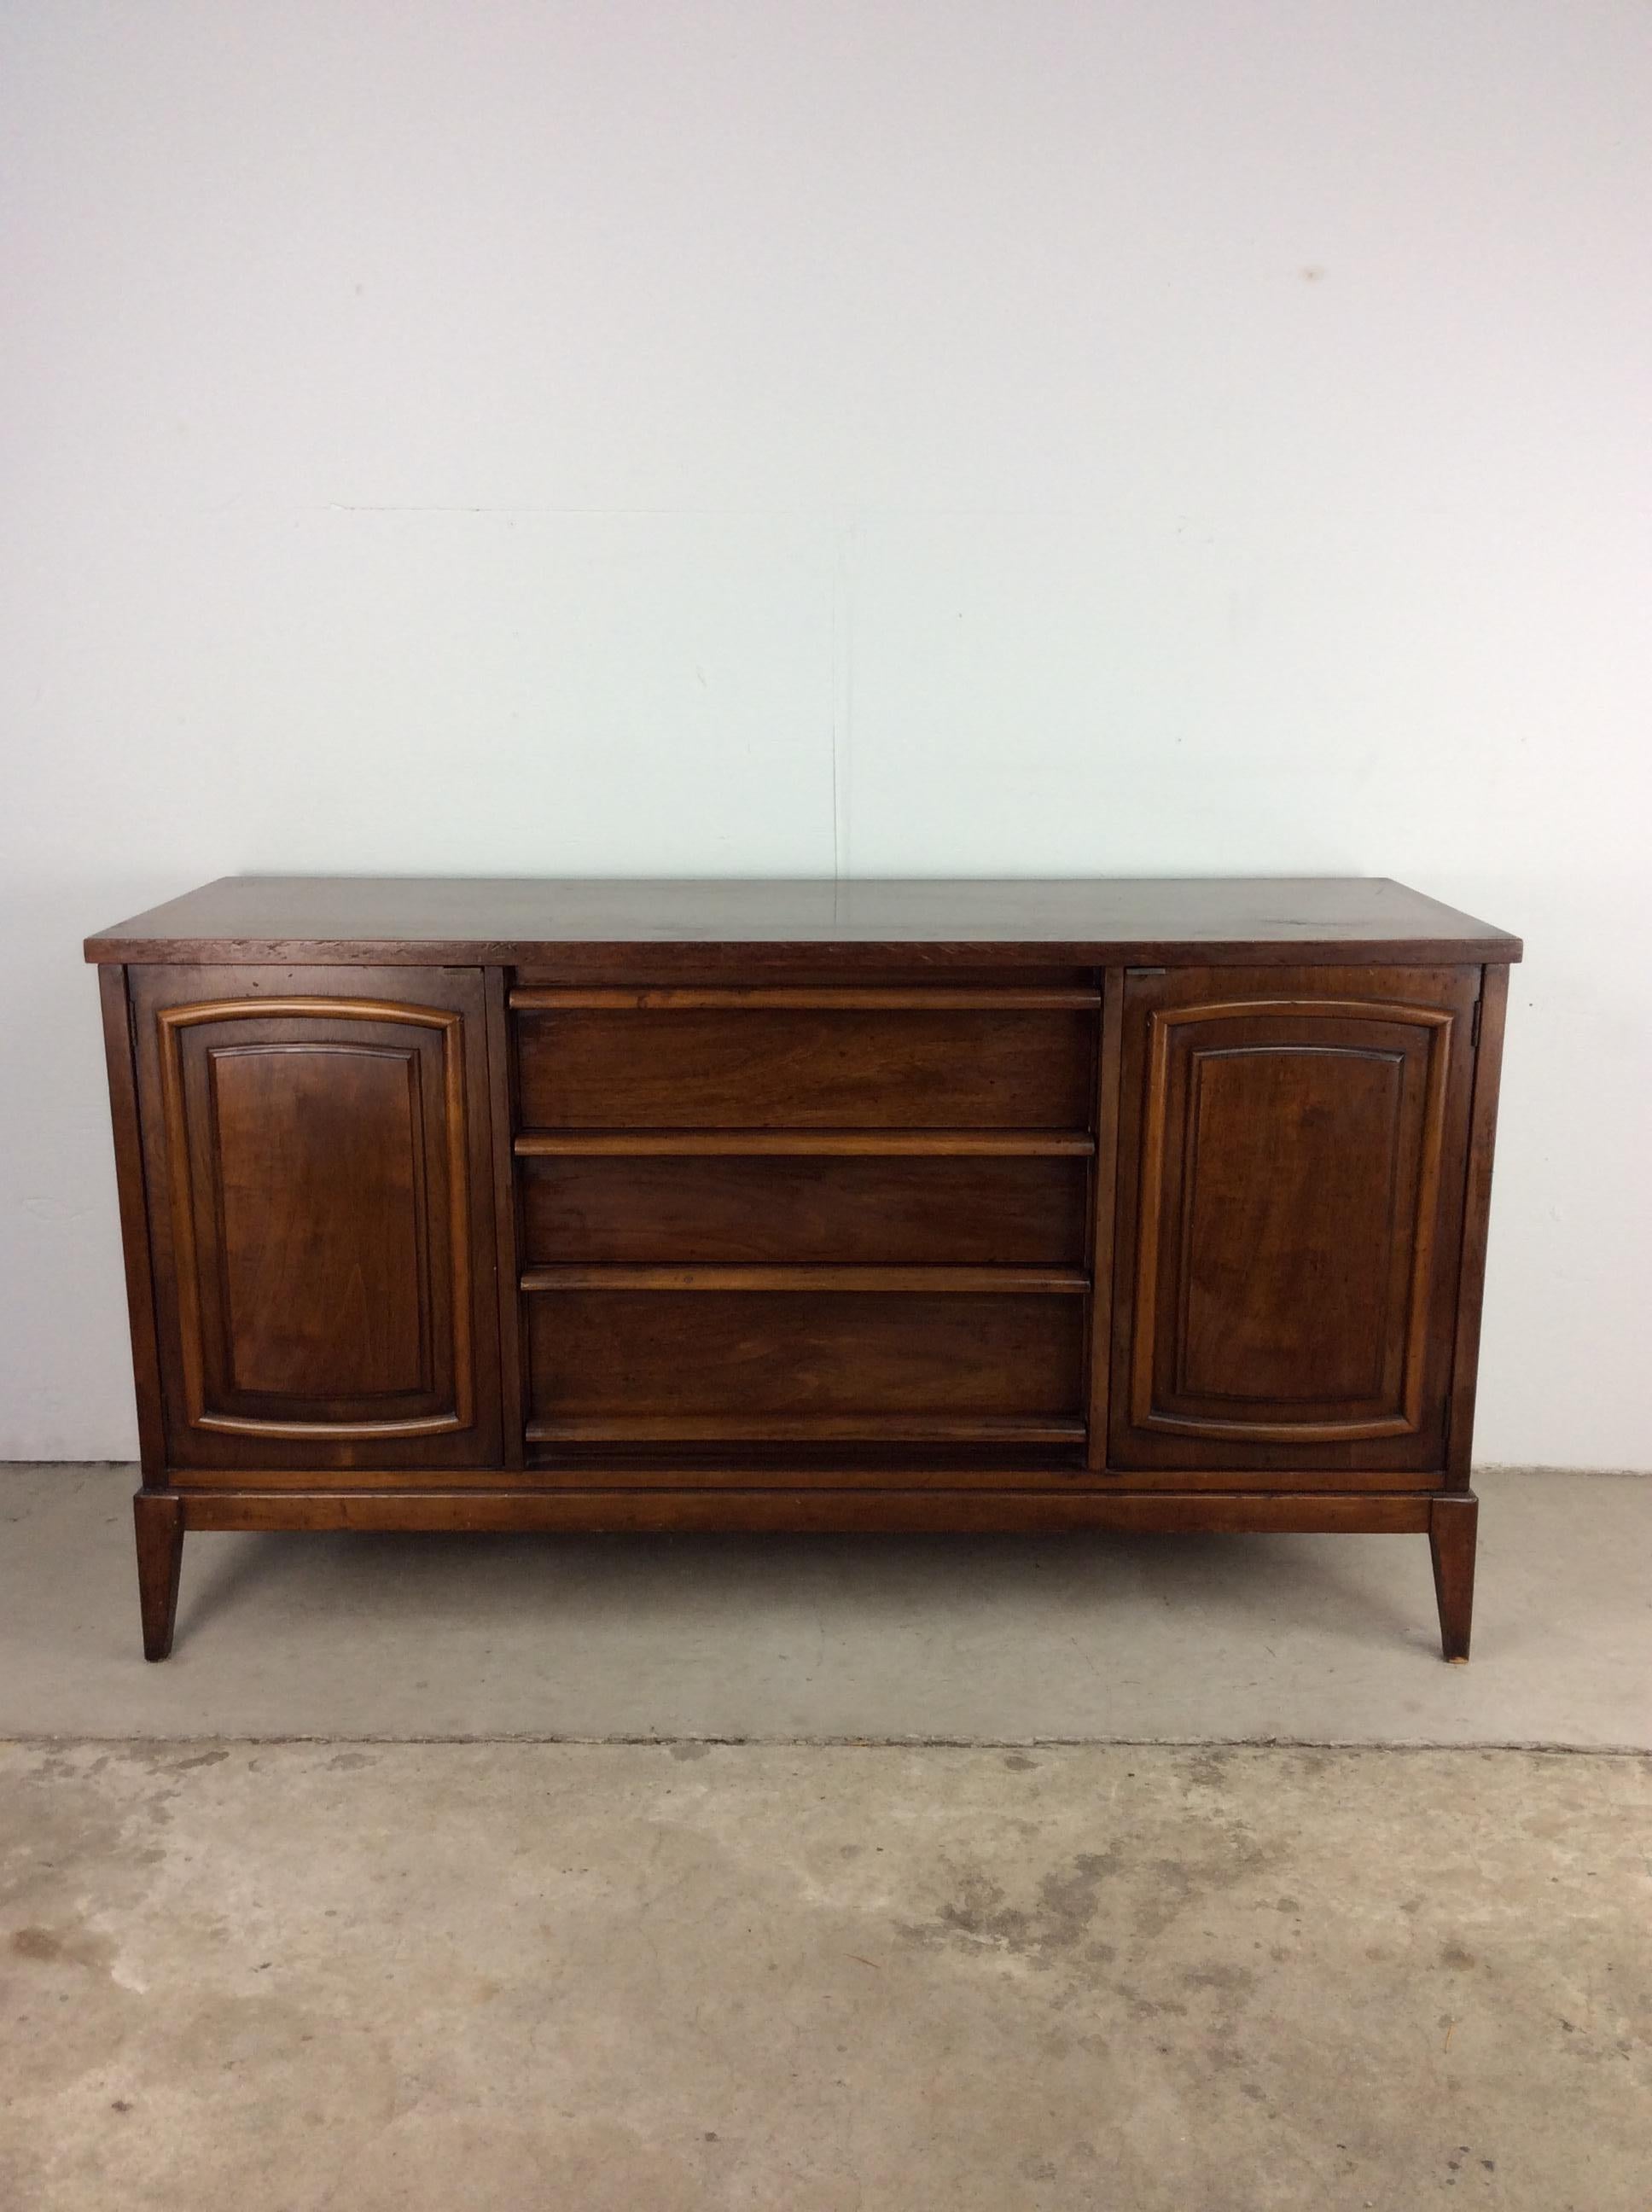 This mid century modern credenza / sideboard features hardwood construction, walnut veneer with original finish, three dovetailed drawers with sculpted wood pulls, two cabinets with single shelves, and tall tapered legs.

Dimensions: 56w 19d